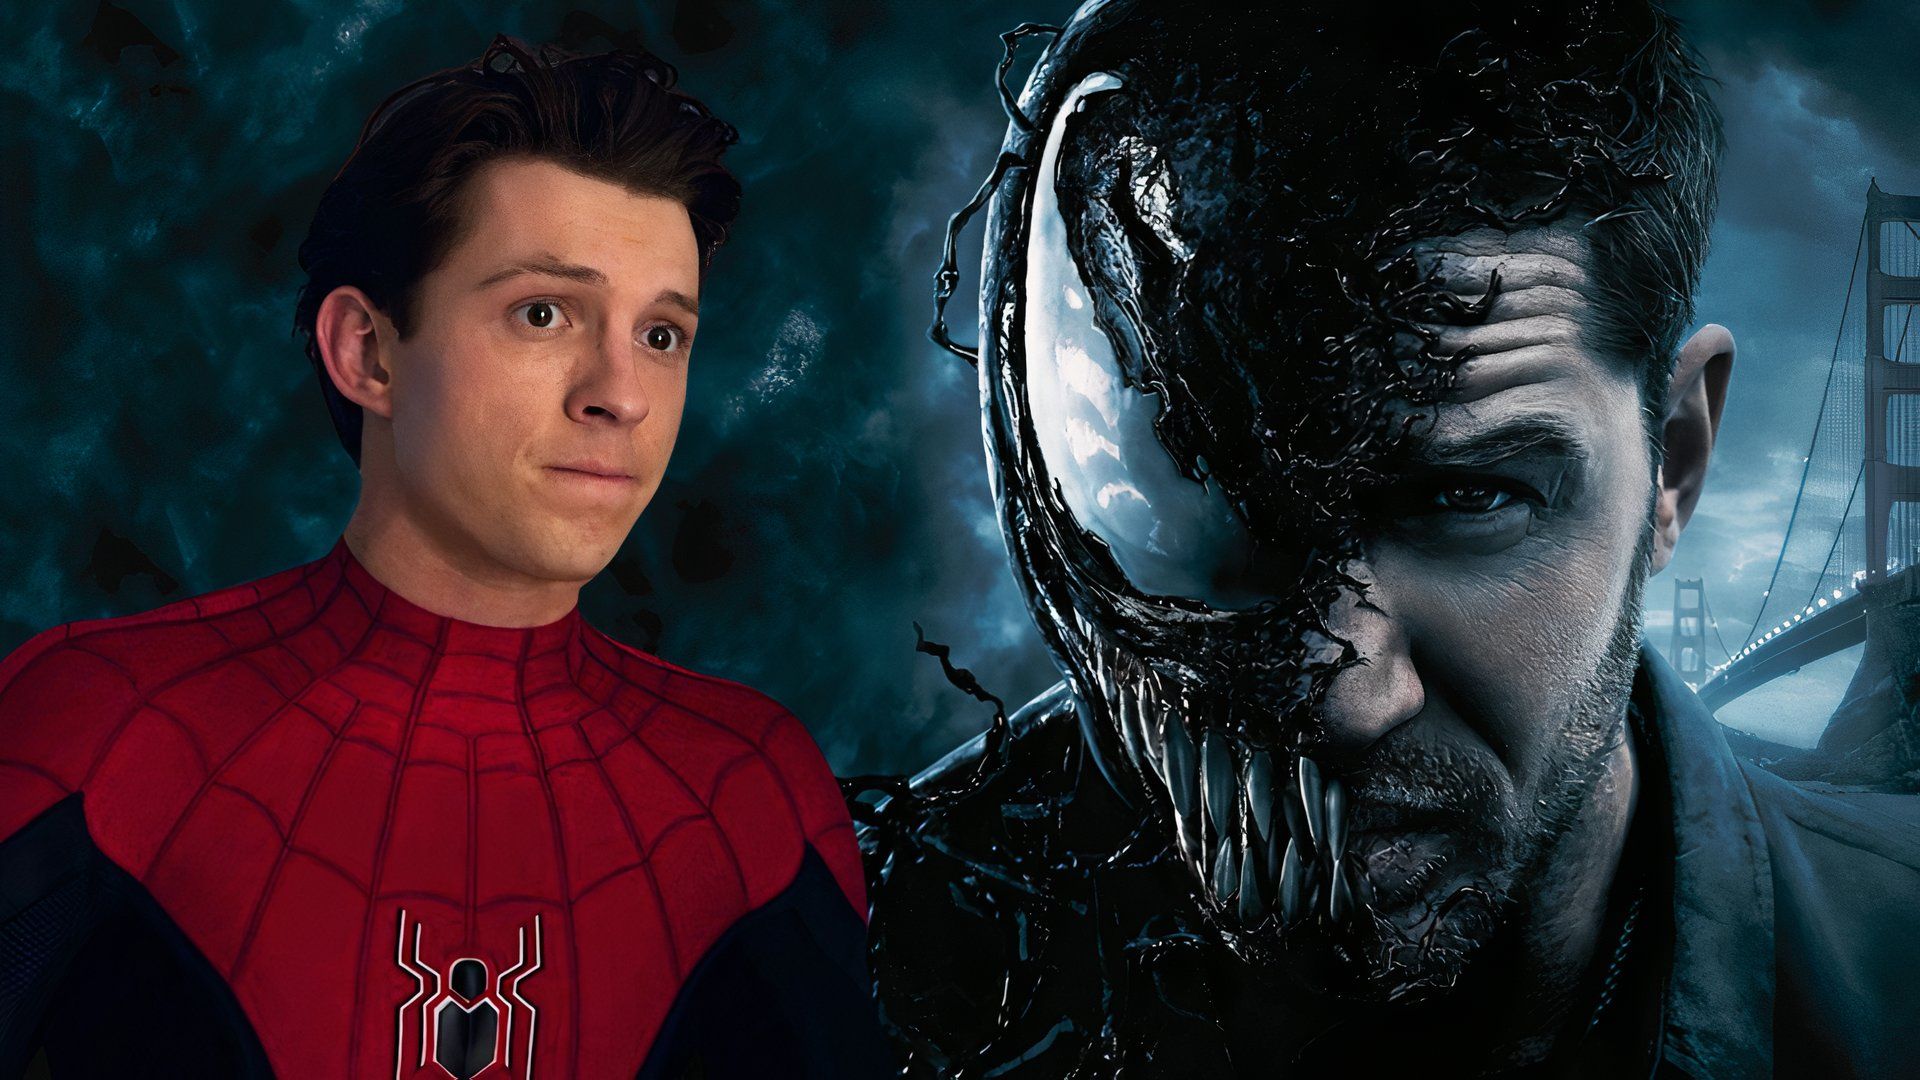 An edited image of Tom Holland as Spider-Man wearing his suit with Tom Hardy as Eddie Brock/Venom in Venom next to him